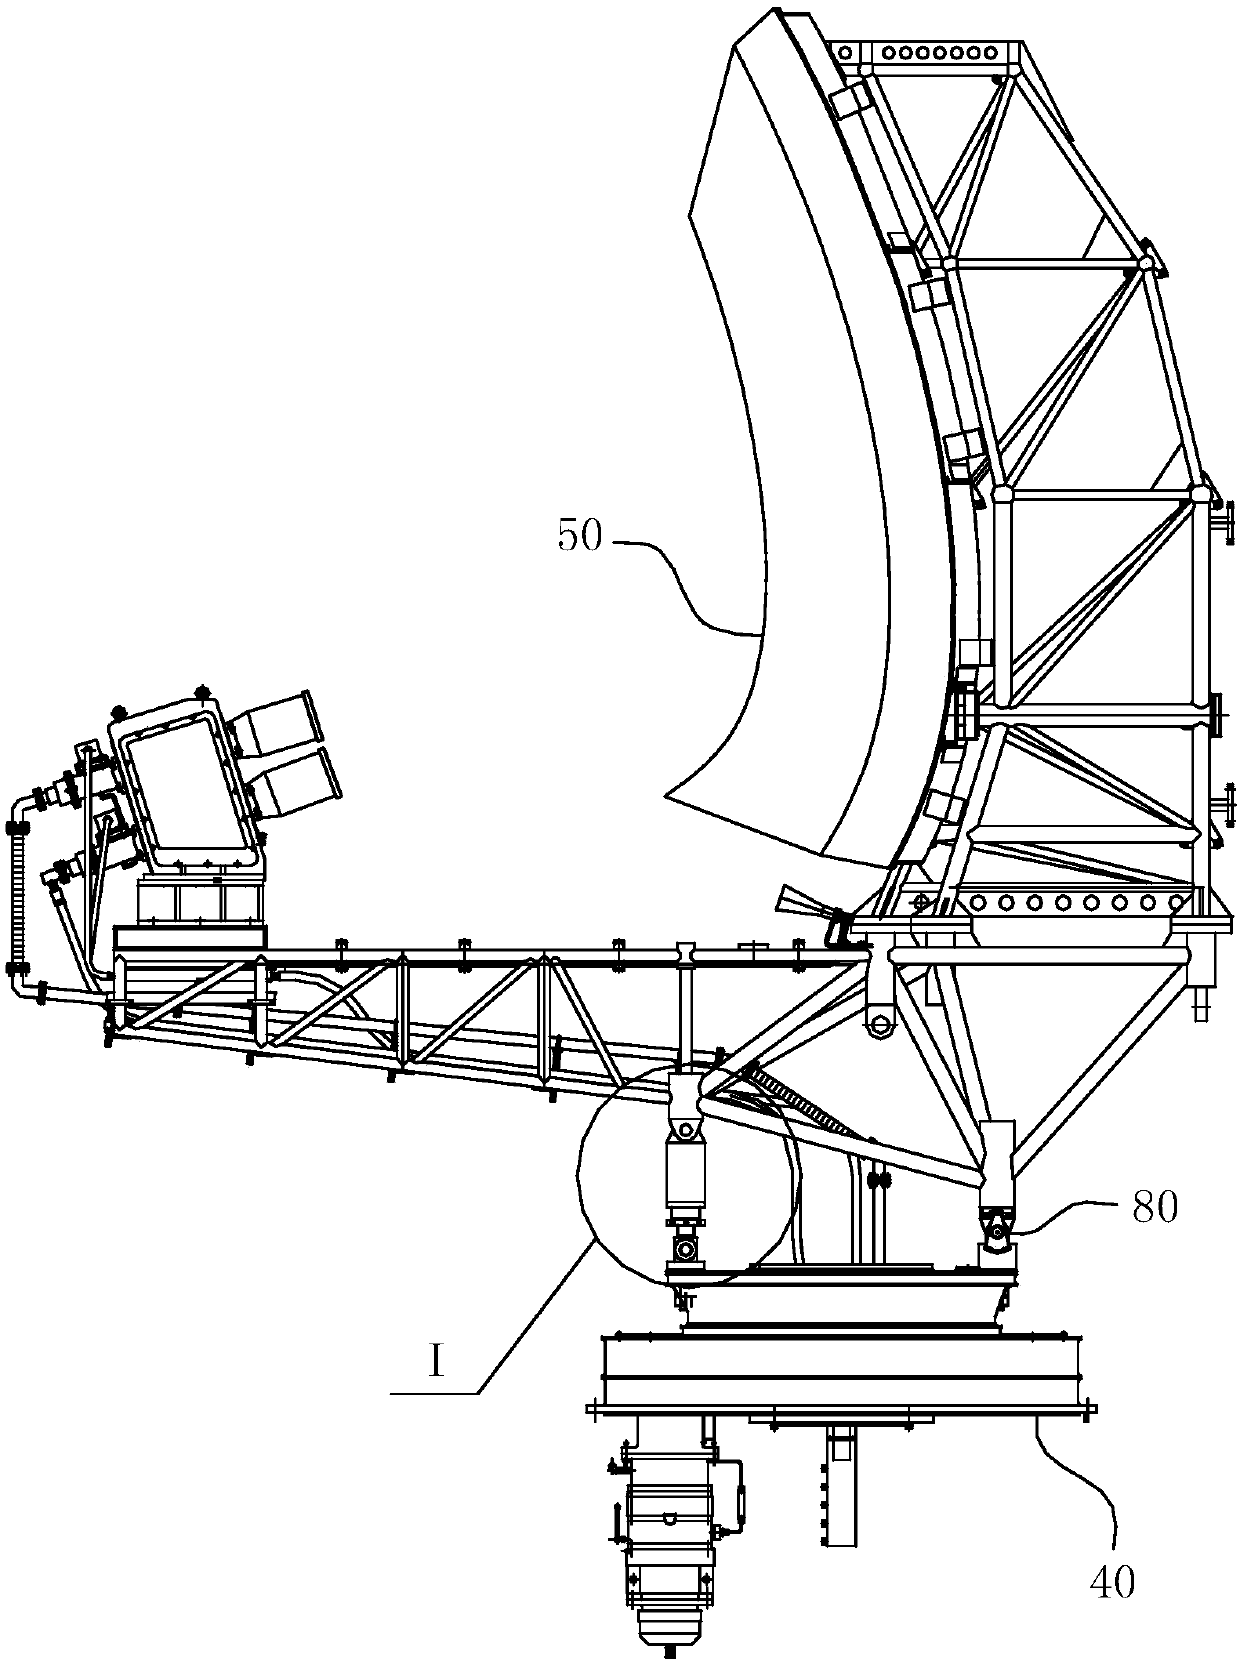 Double-program rain-proof adjustment components and the pitching mechanism of the air traffic control radar antenna applied